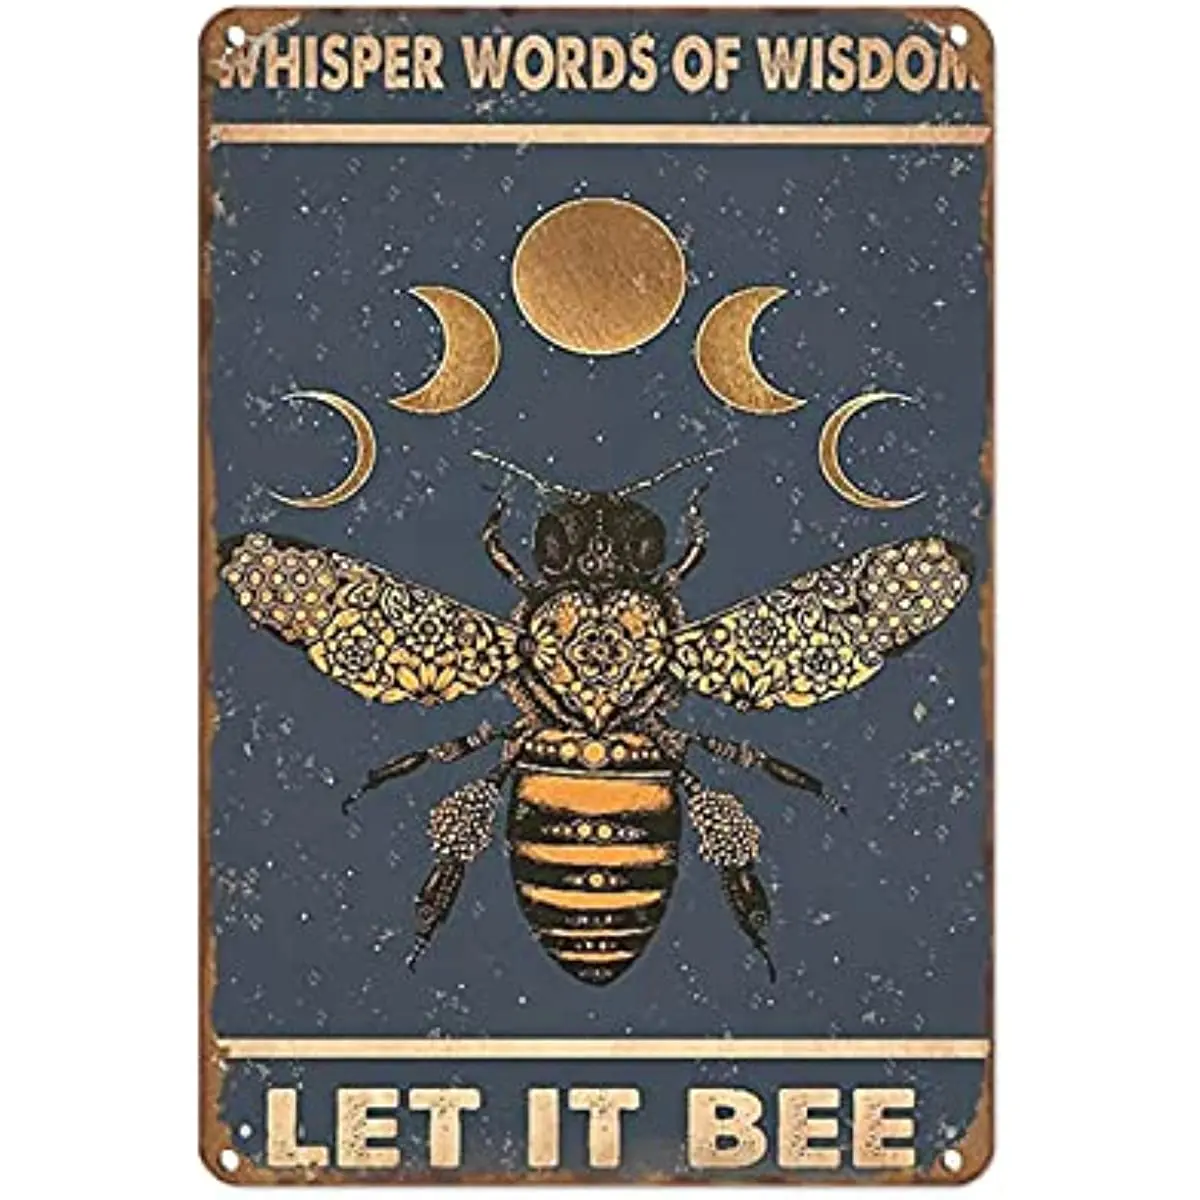 

New Metal Tin Sign Vintage Whisper Words Wisdom Let It Be Bees Bee Lover Bumble Bees Artwork Hot Desserts for Home, Living Room